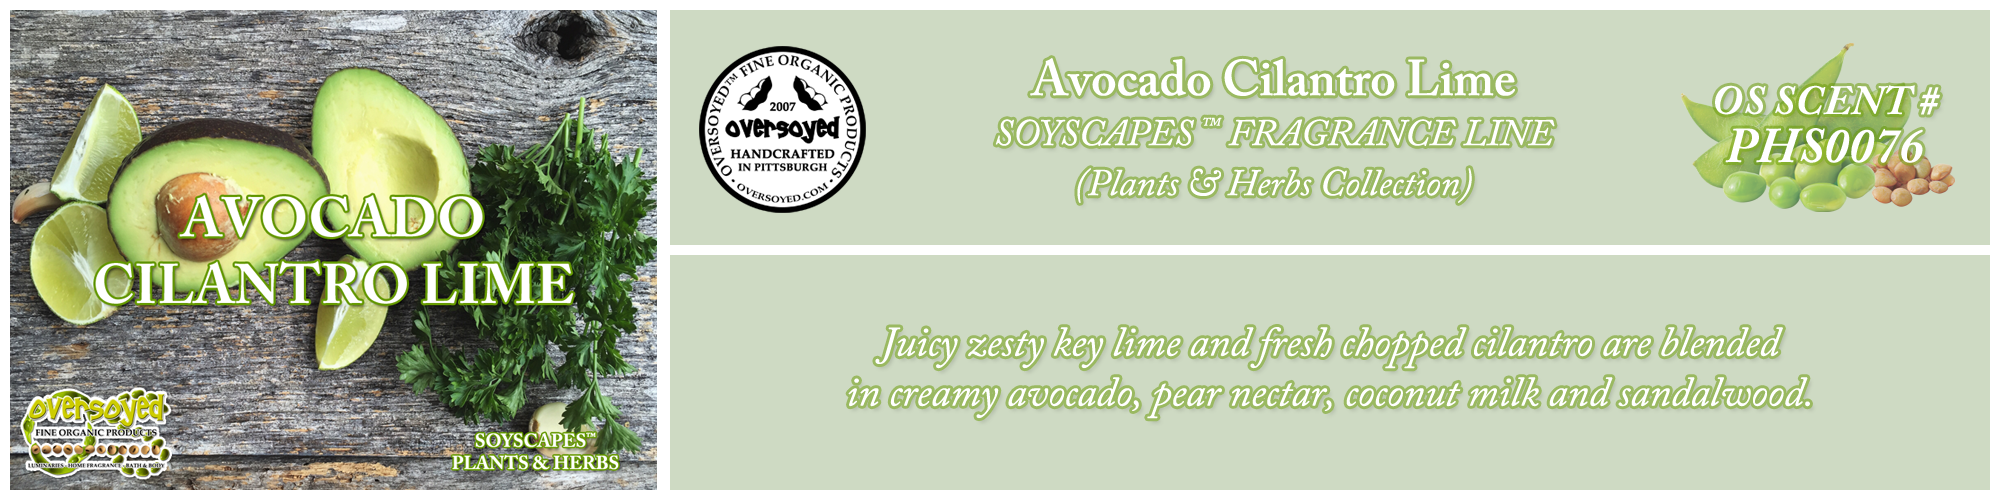 Avocado Cilantro Lime Handcrafted Products Collection